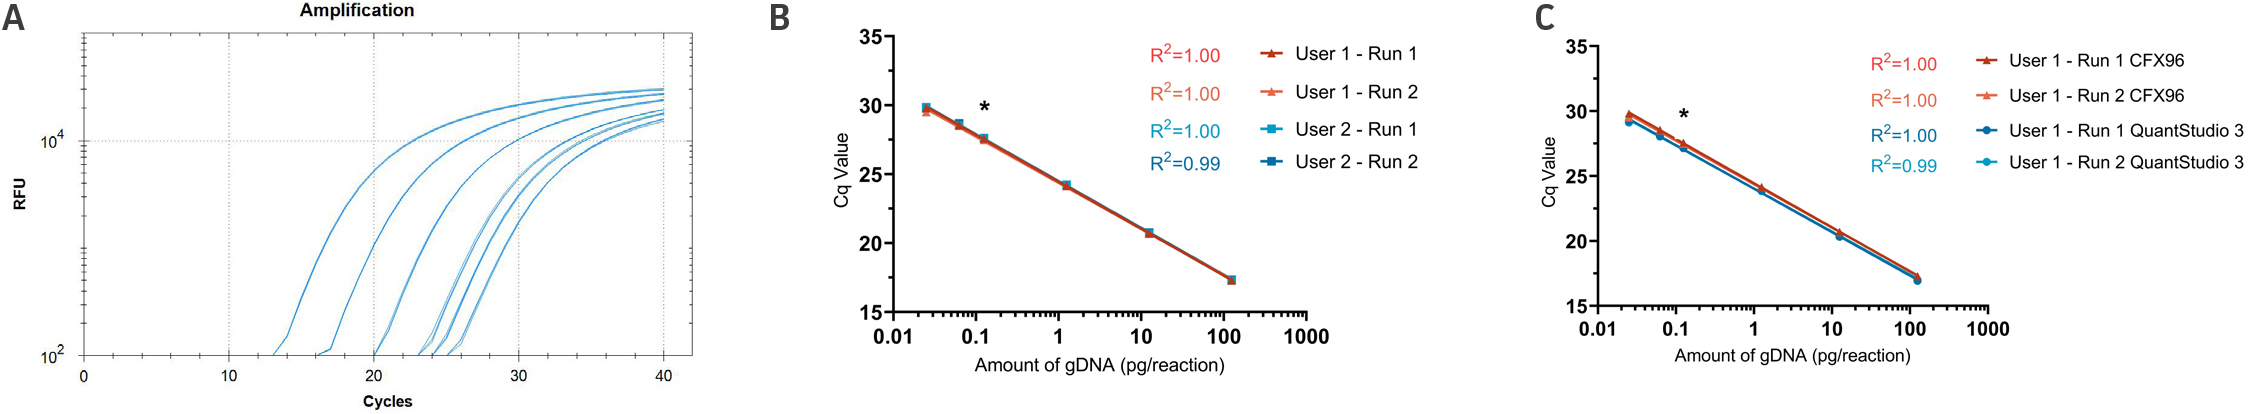 Comparative qPCR results summary regarding linearity and sensitivity of the Zhang et al. assay using HEK293 gDNA